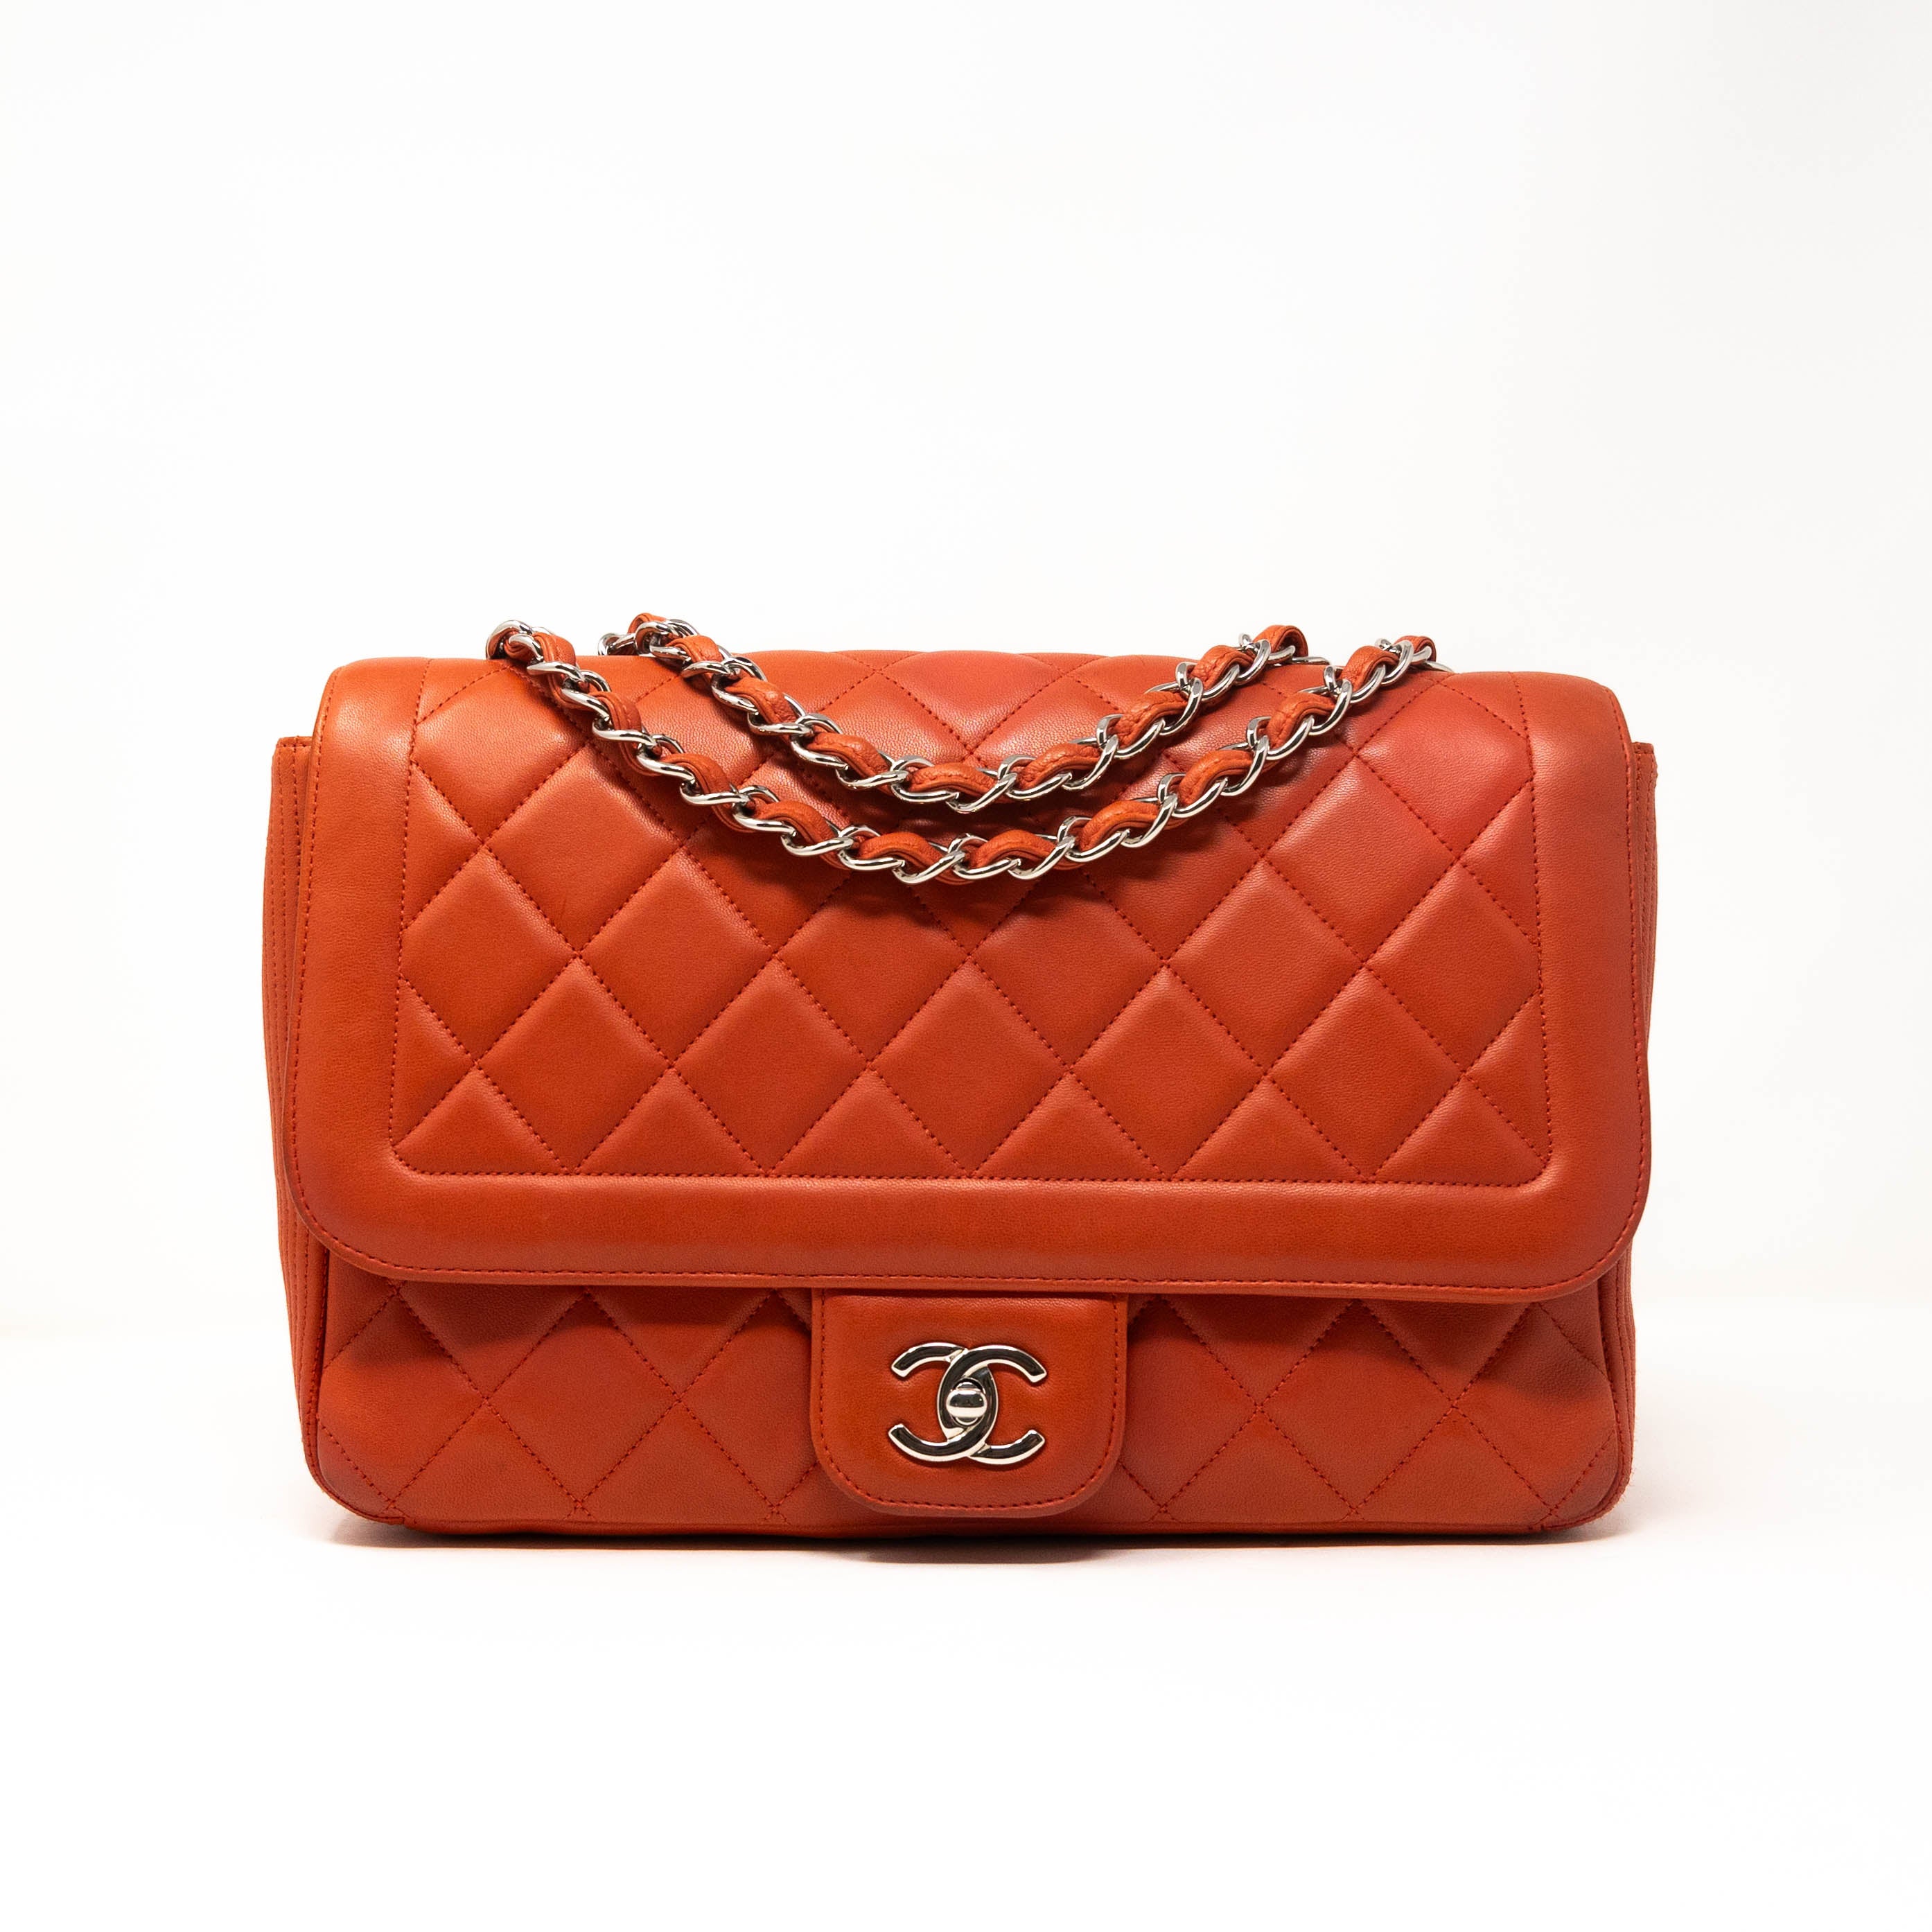 Chanel Red Large Coco Rider Flap